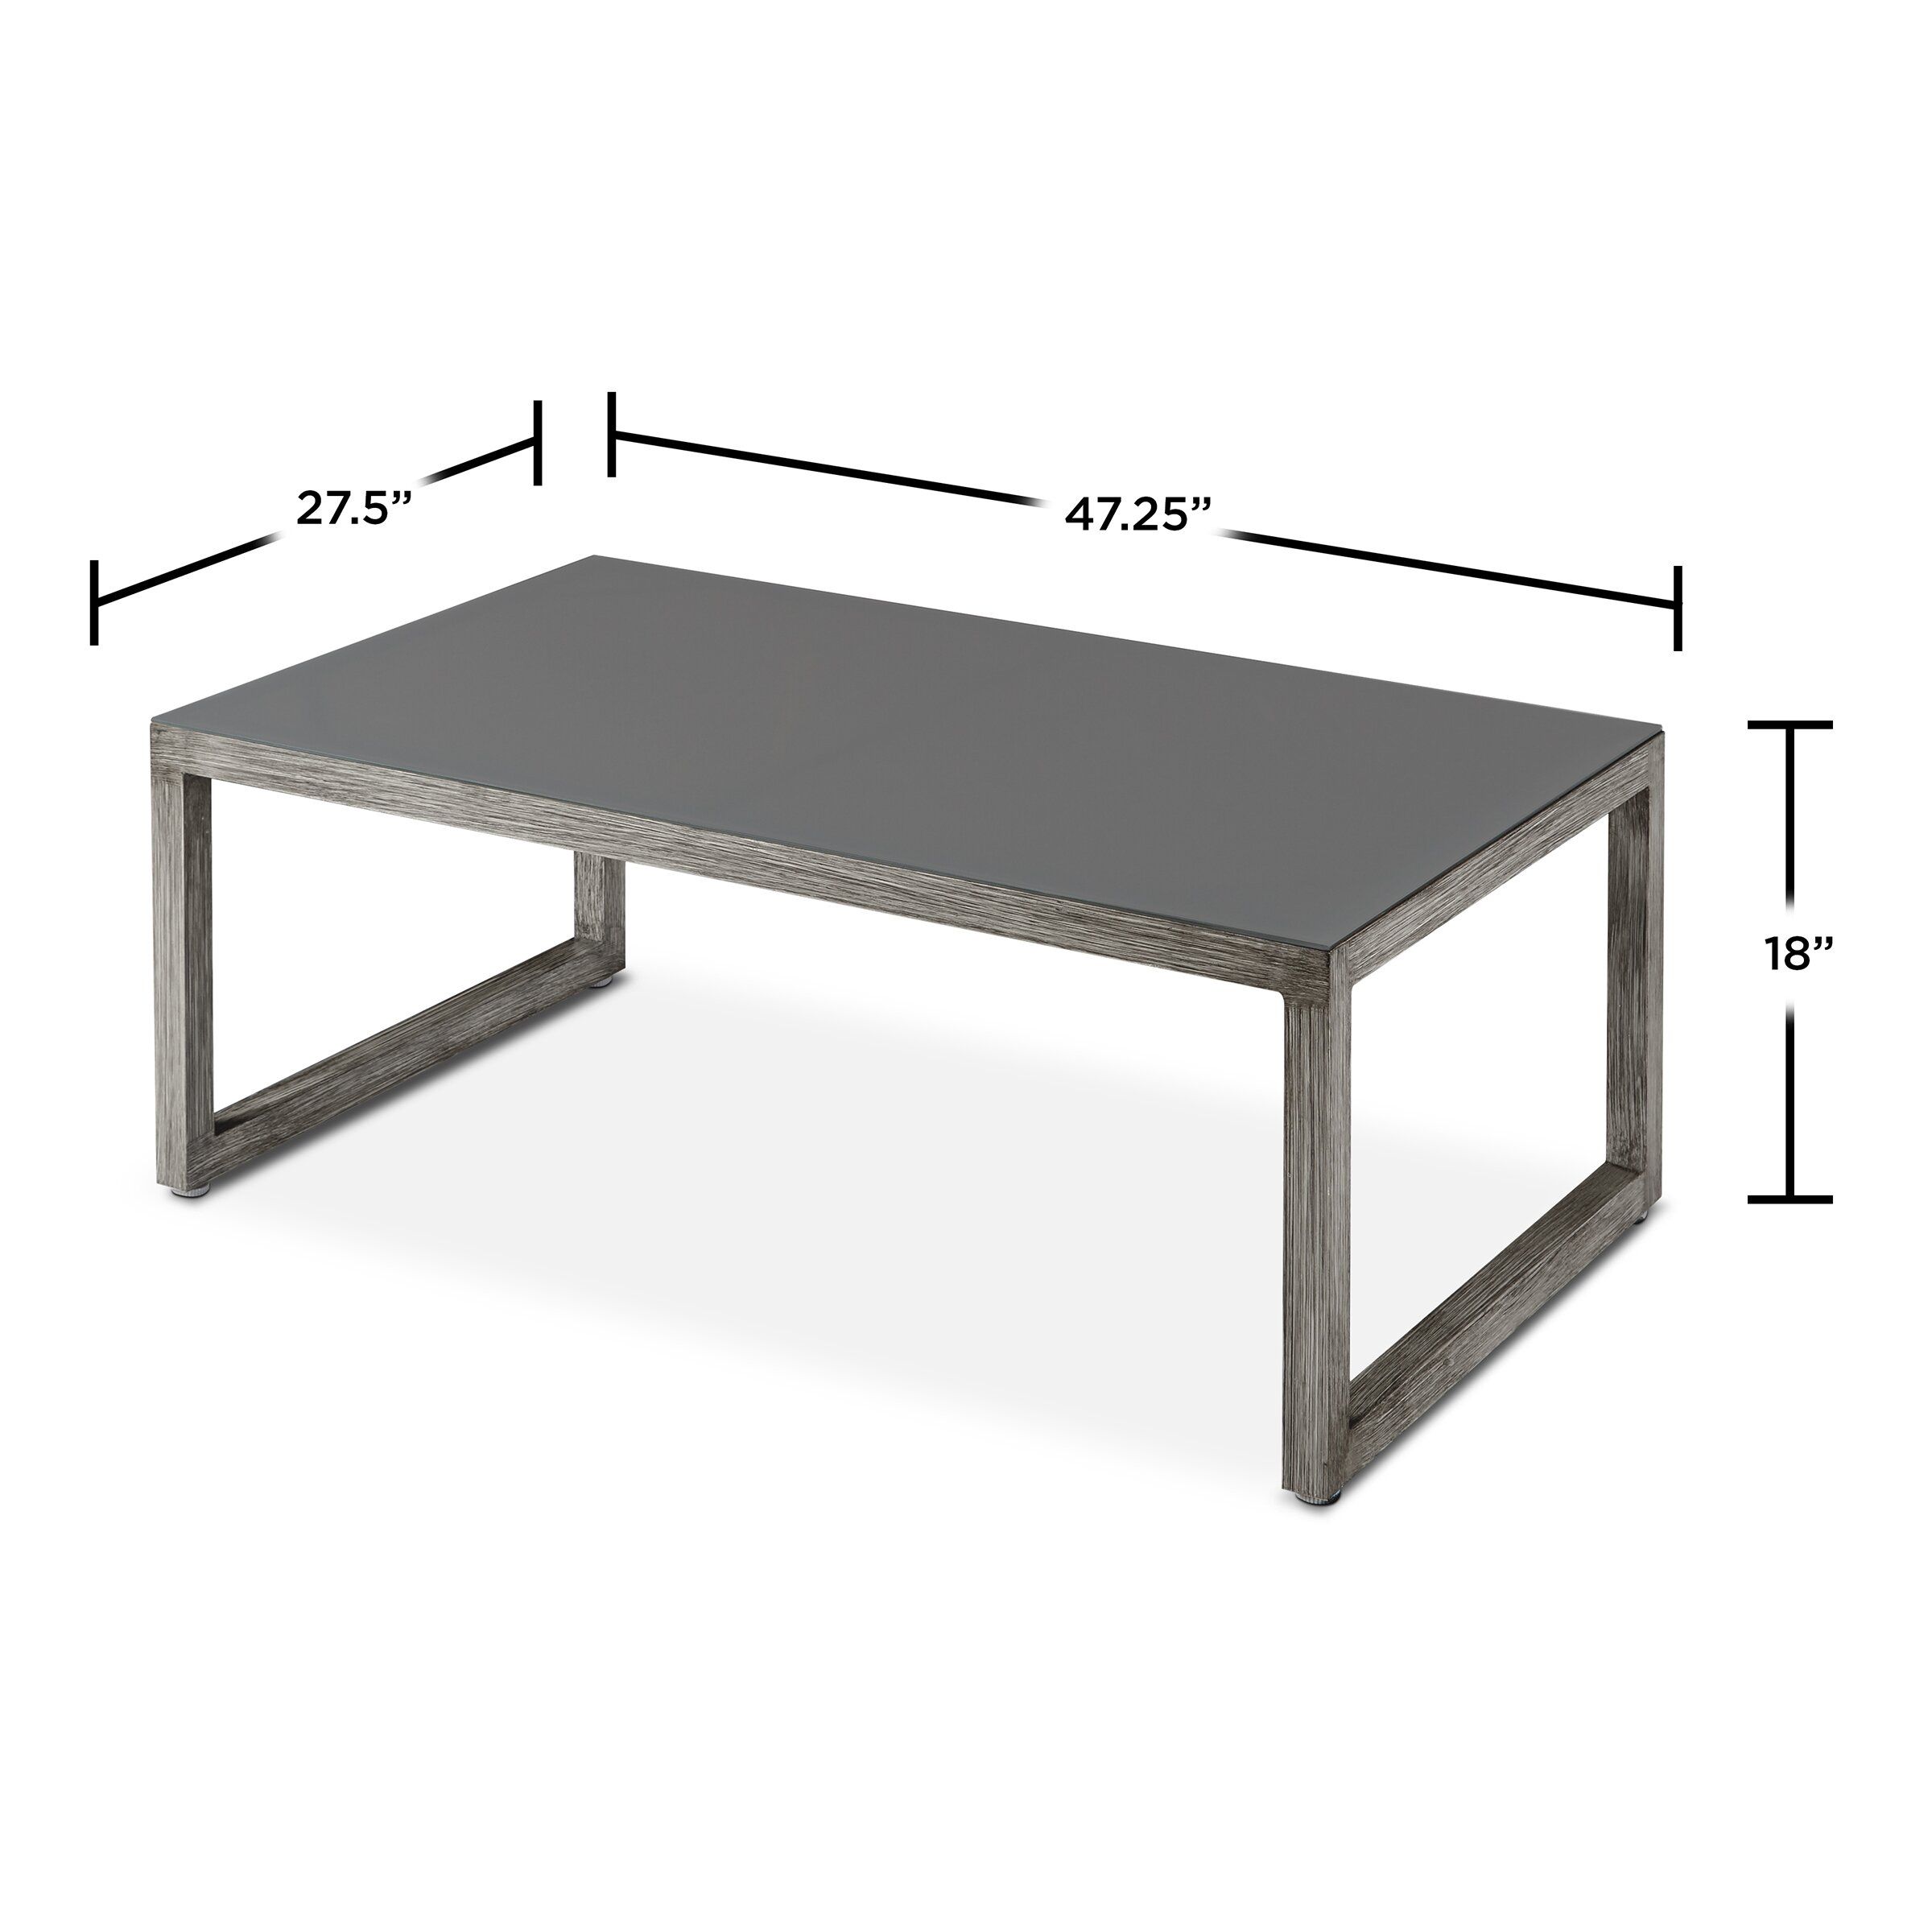 Real Flame Monaco Coffee Table | Wayfair For Monaco Round Coffee Tables (View 8 of 20)